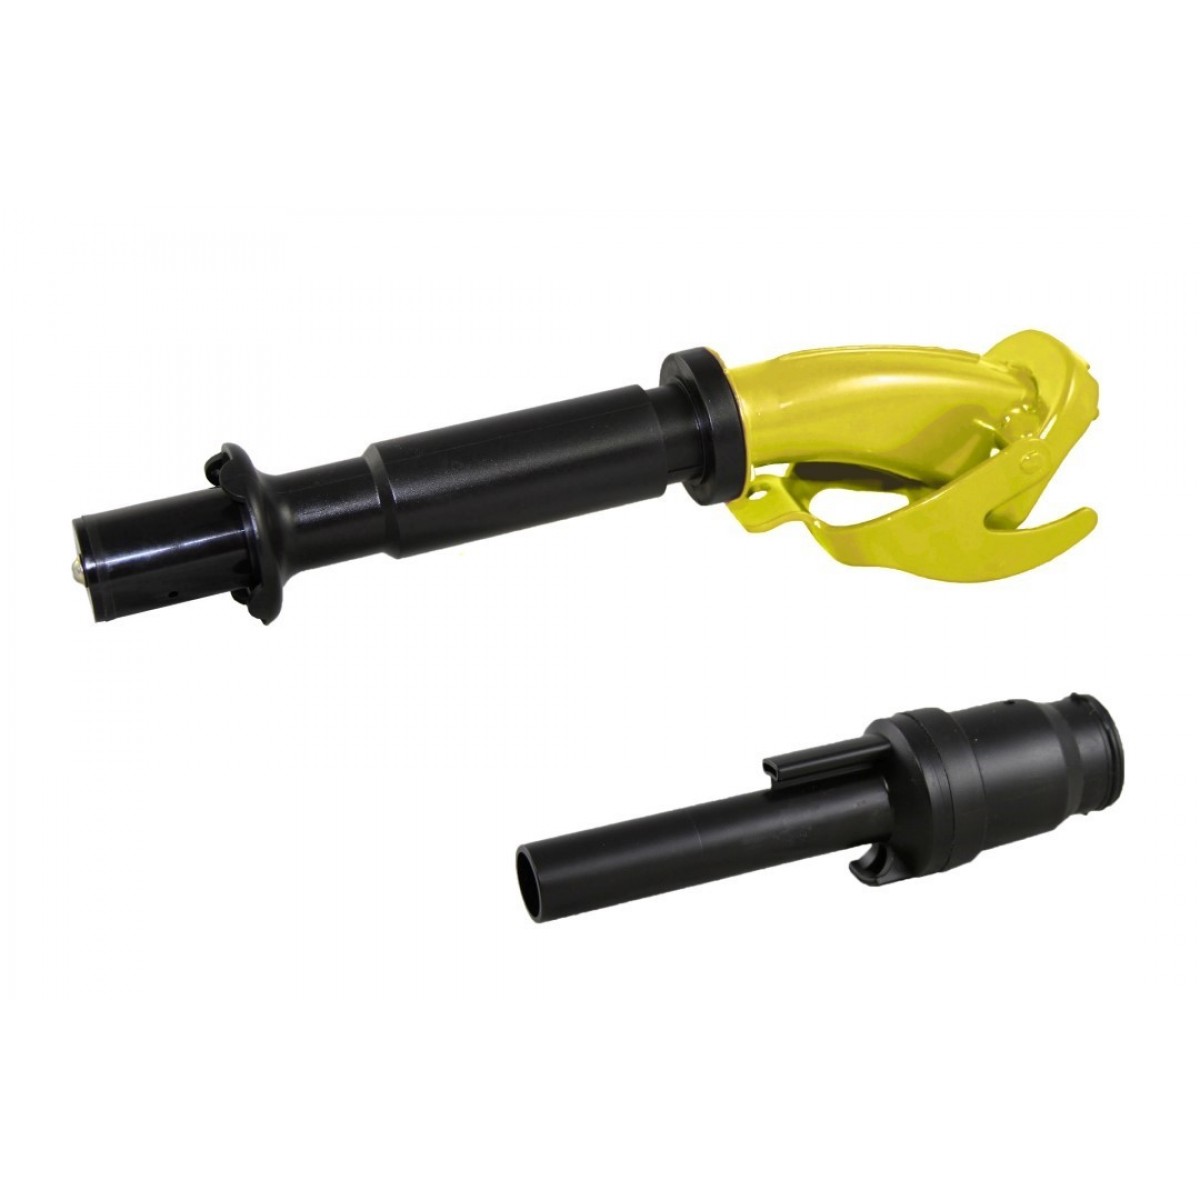 Safety Spout Nozzle - Yellow